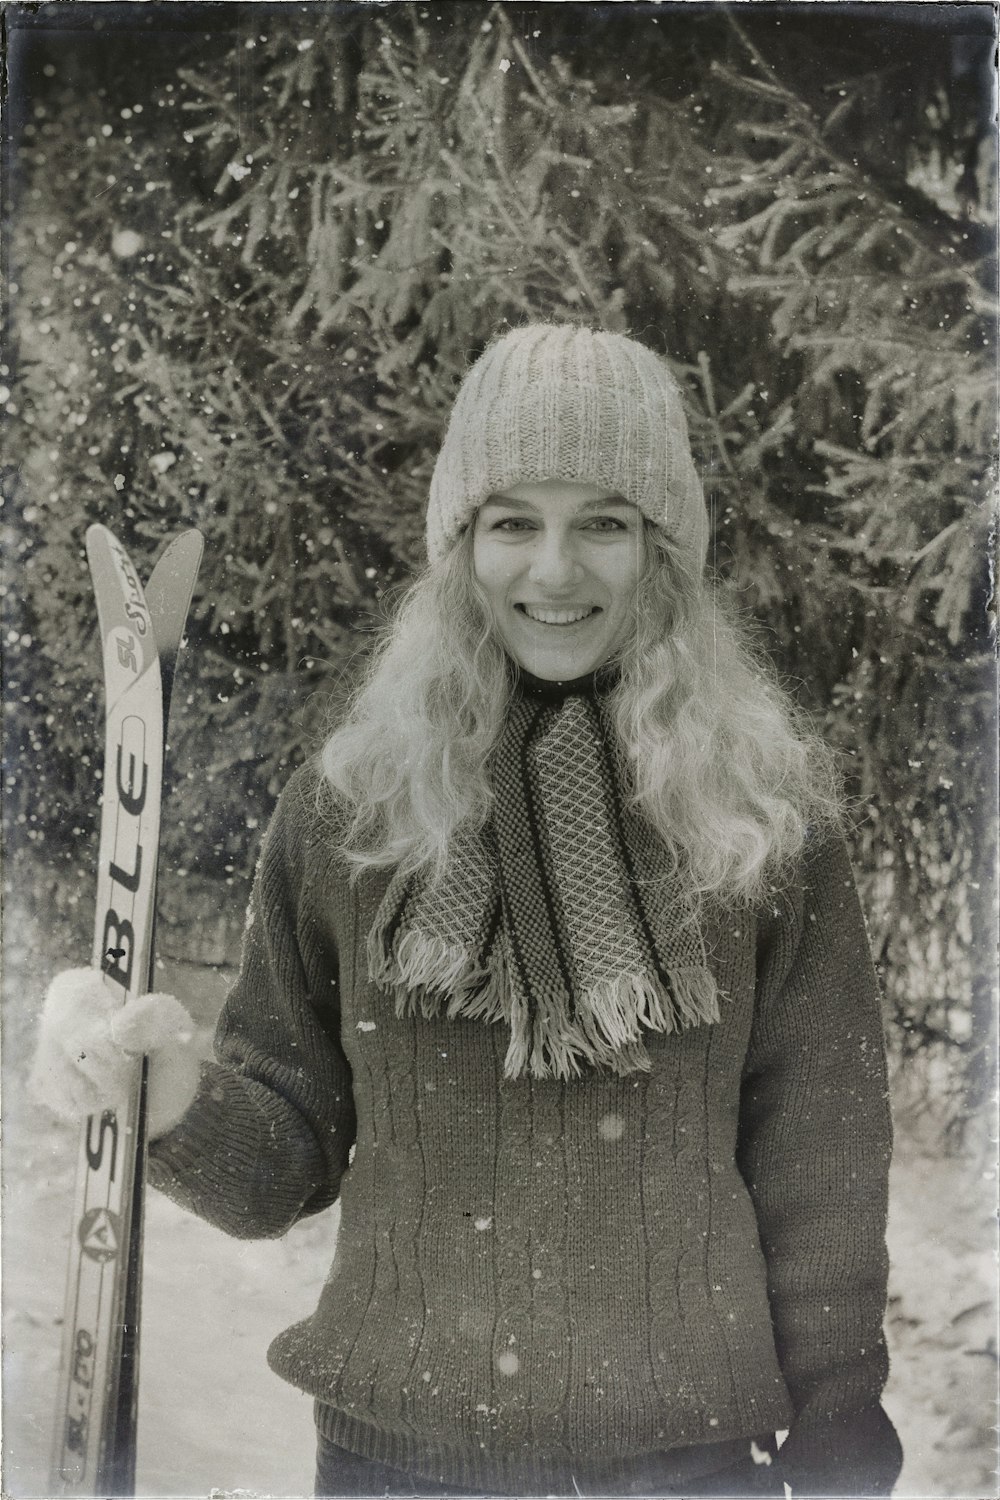 a black and white photo of a woman holding skis